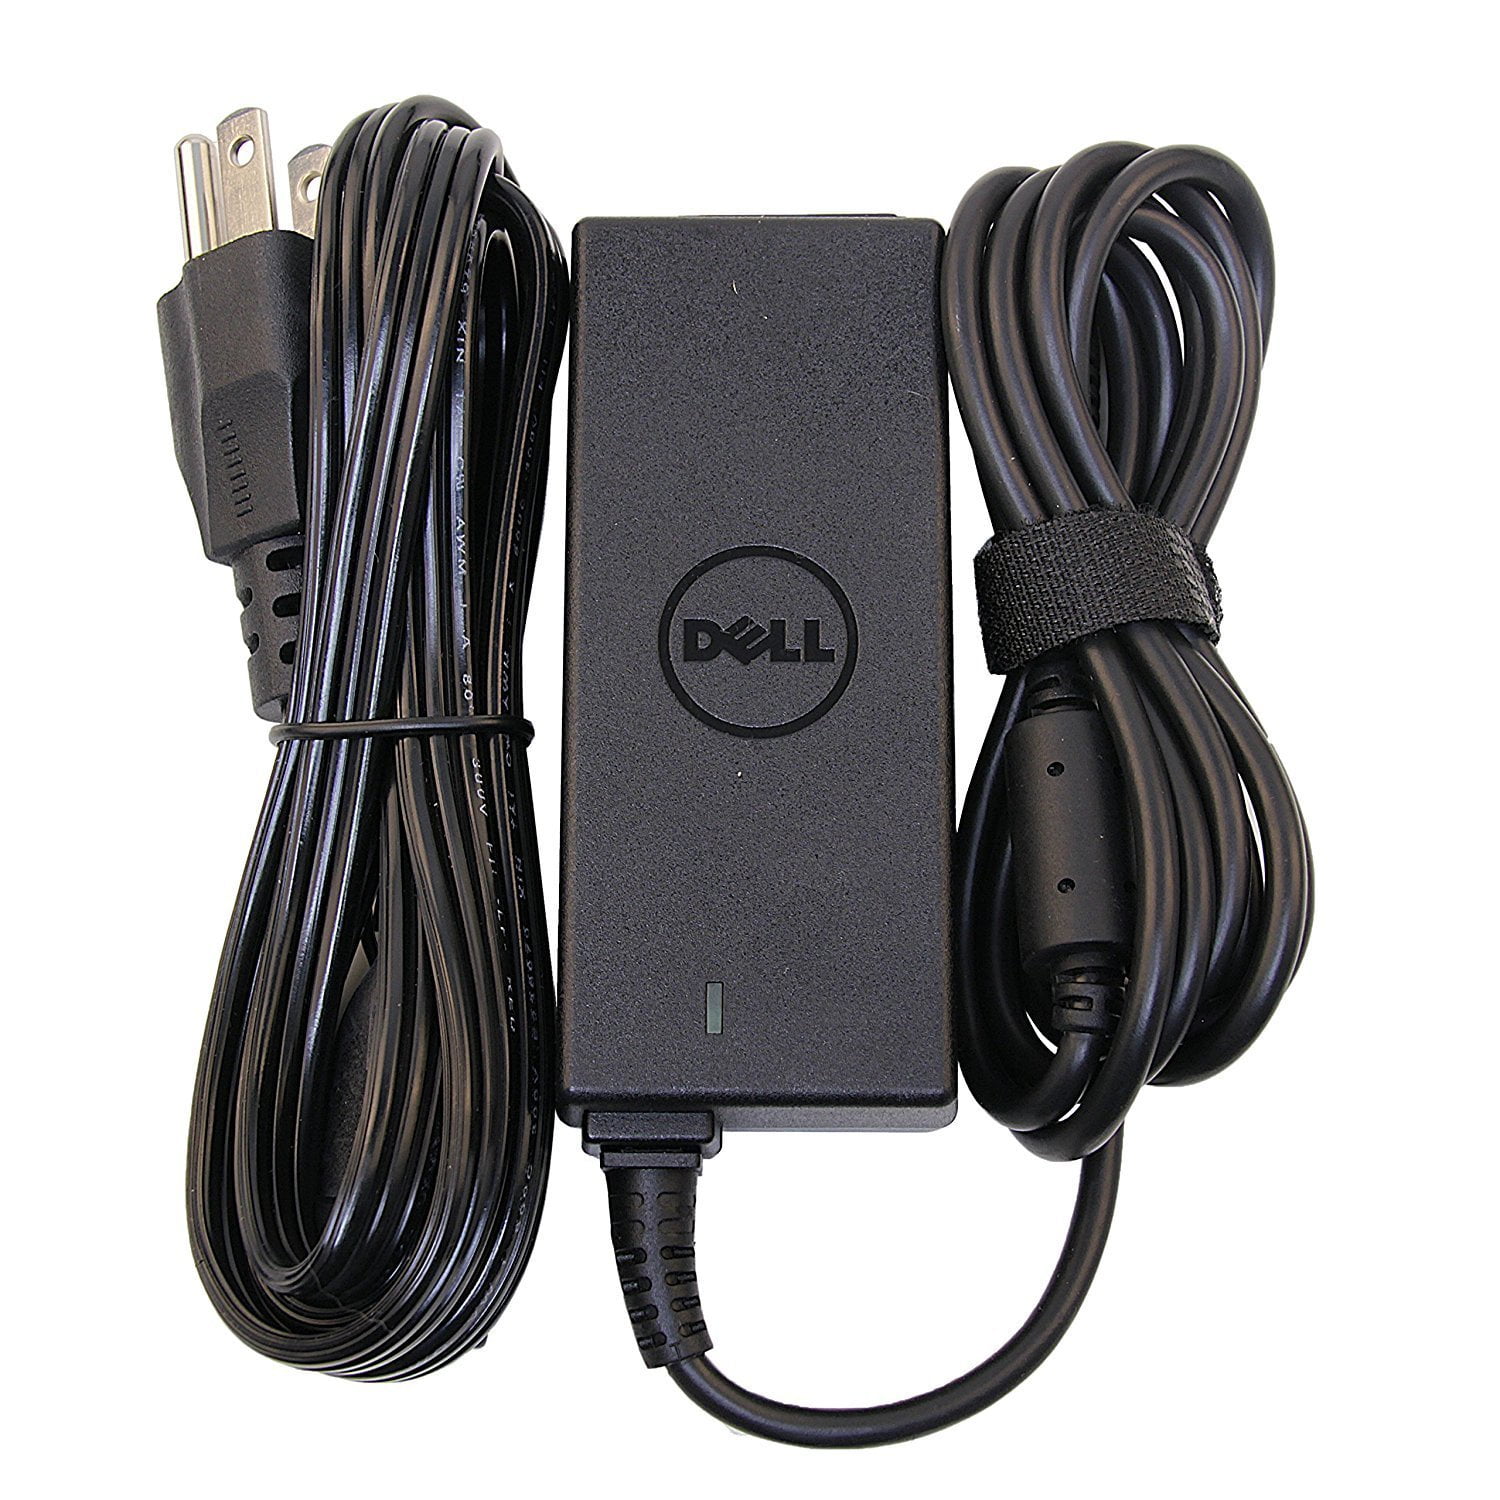 NEW GENUINE DELL INSPIRON 15 5578 7558 7568 7569 7579 45W CHARGER 0285K 70VTC 